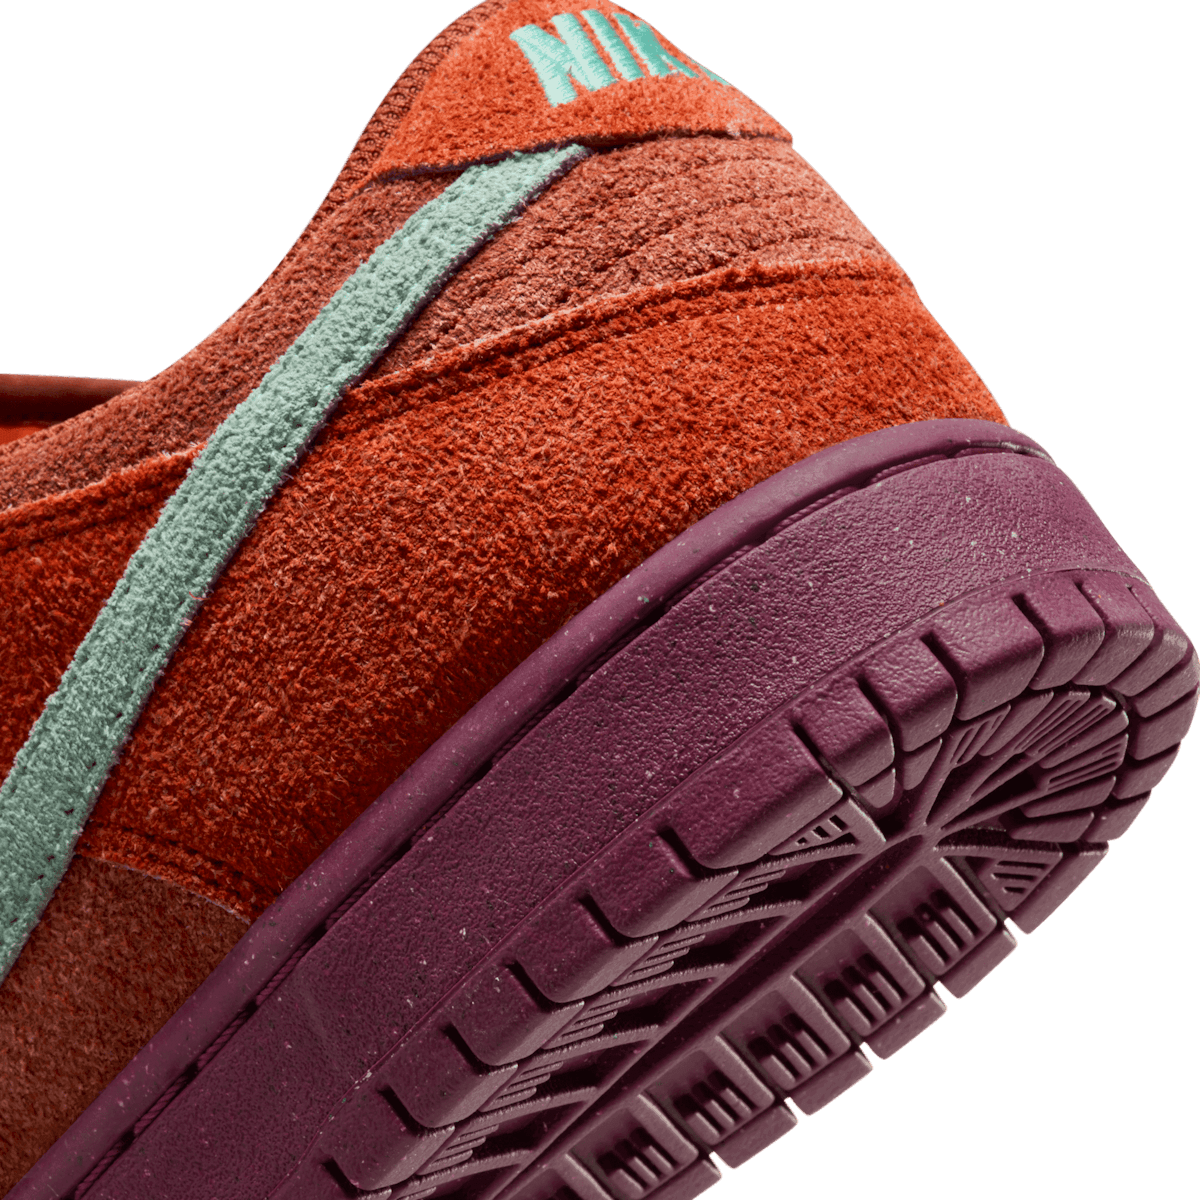 Nike SB Dunk Low 'Mystic Red and Rosewood' (DV5429-601) Release